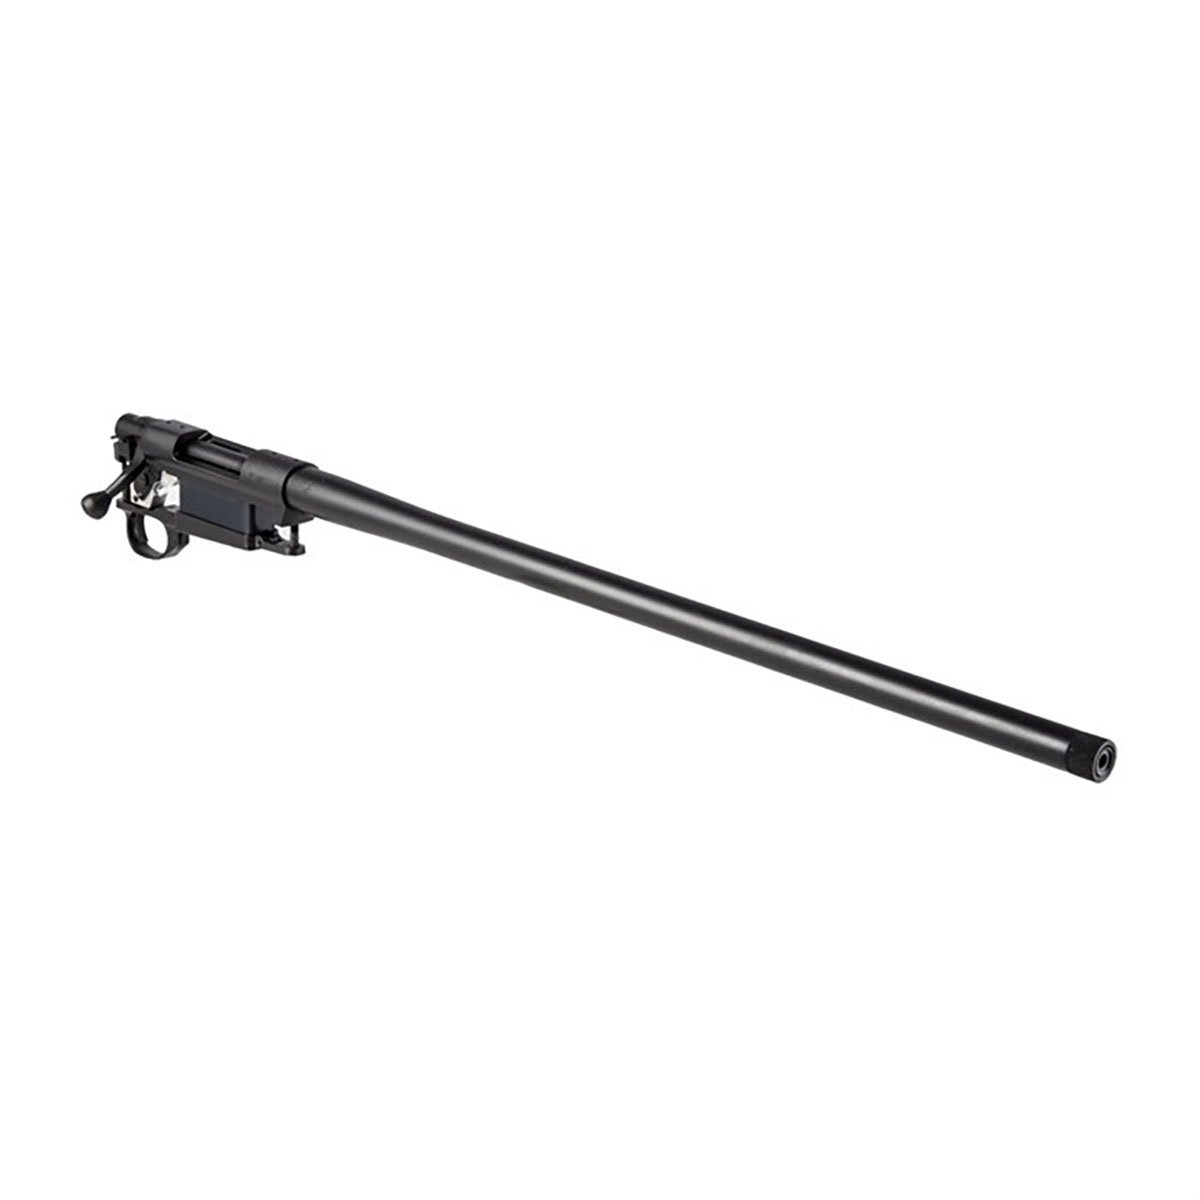 HOWA - M1500 300 PRC 24" BARRELED ACTION